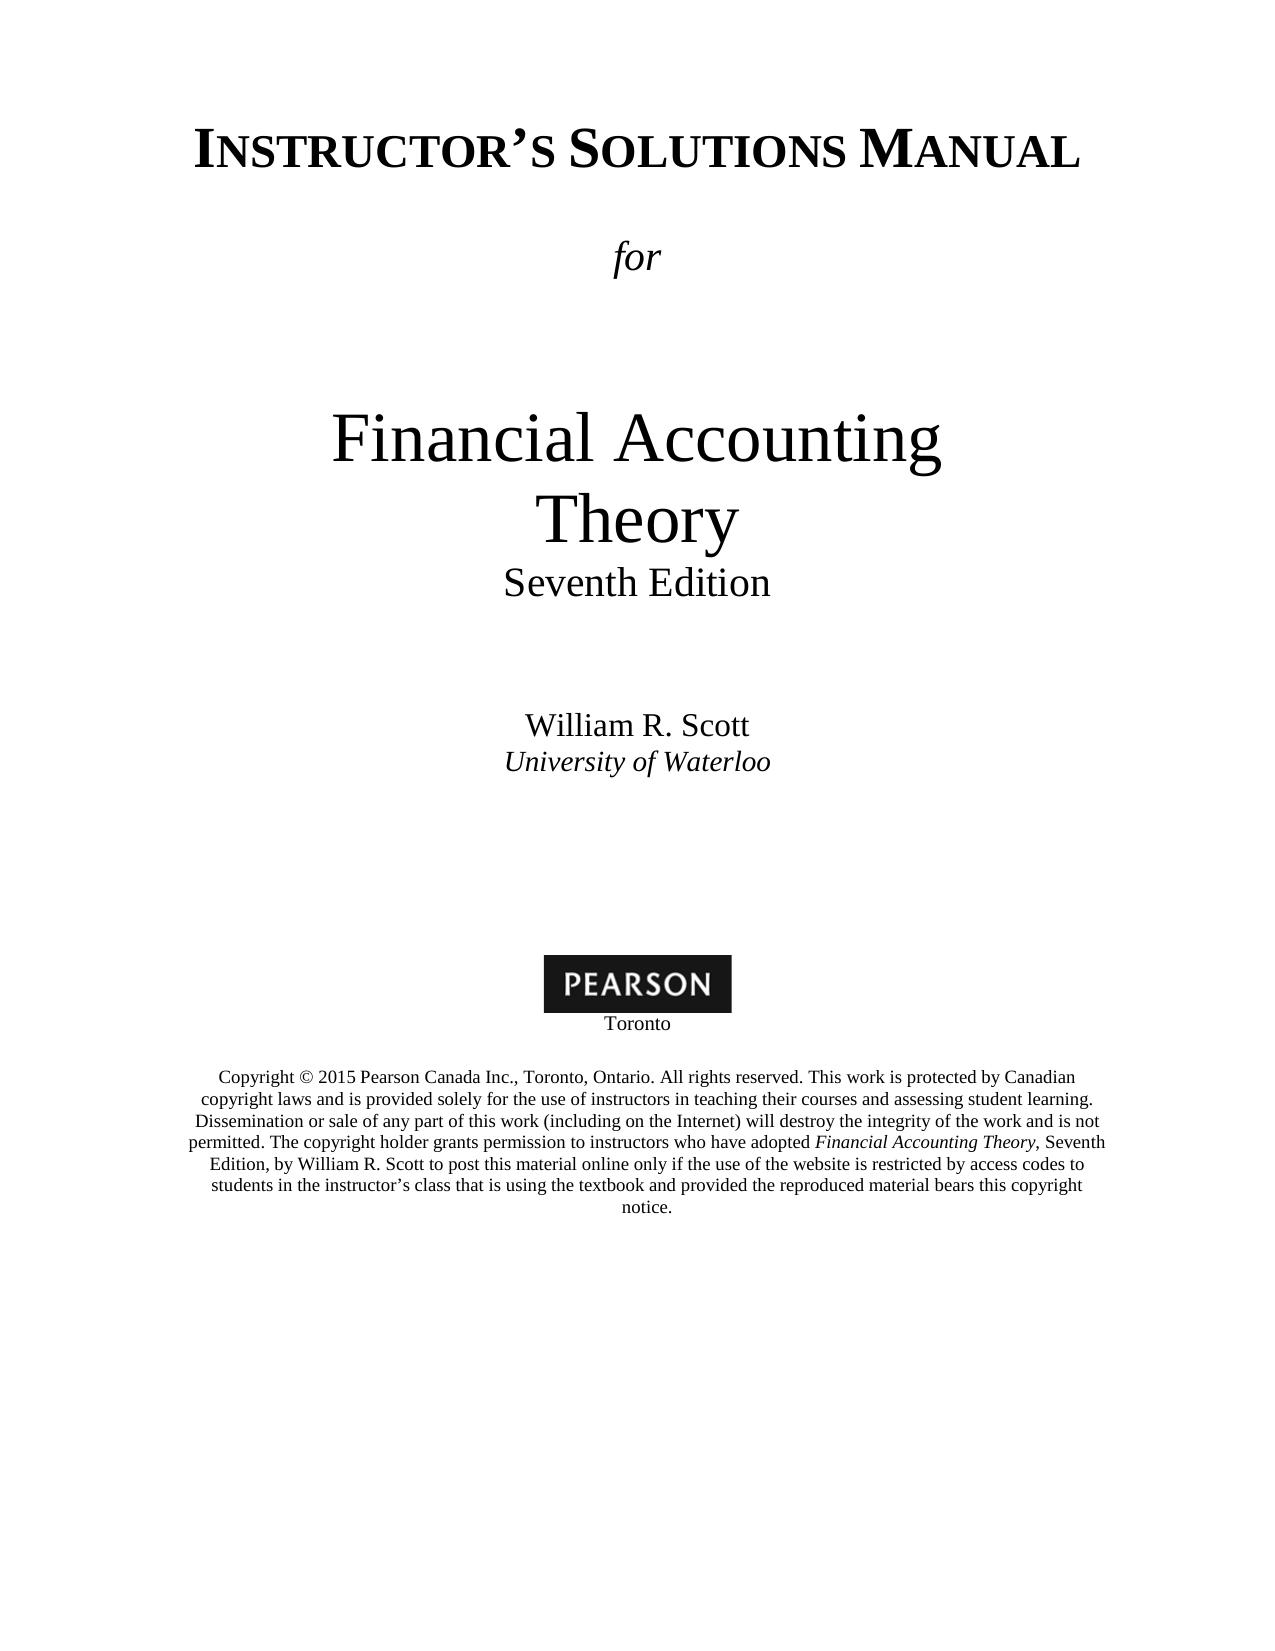 Solution manual for Financial Accounting Theory (7th Edition) ( PDFDrive )